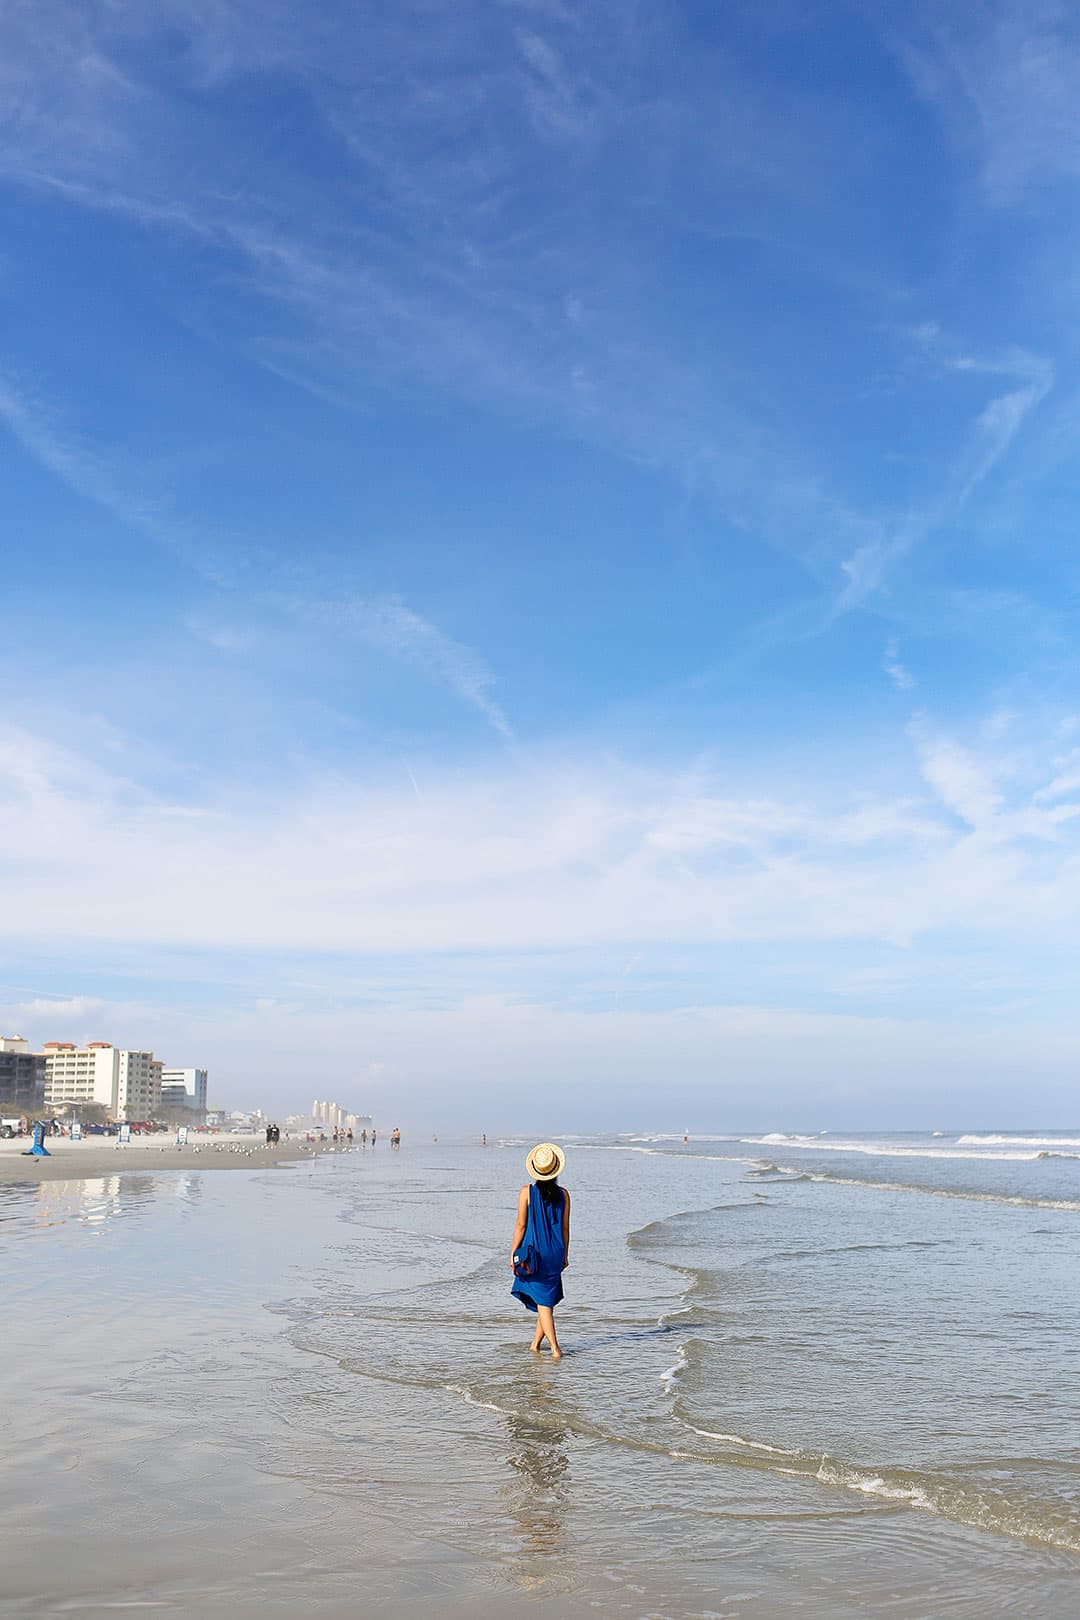 new smyrna beach florida near Orlando + 15 best places to visit in january in the usa